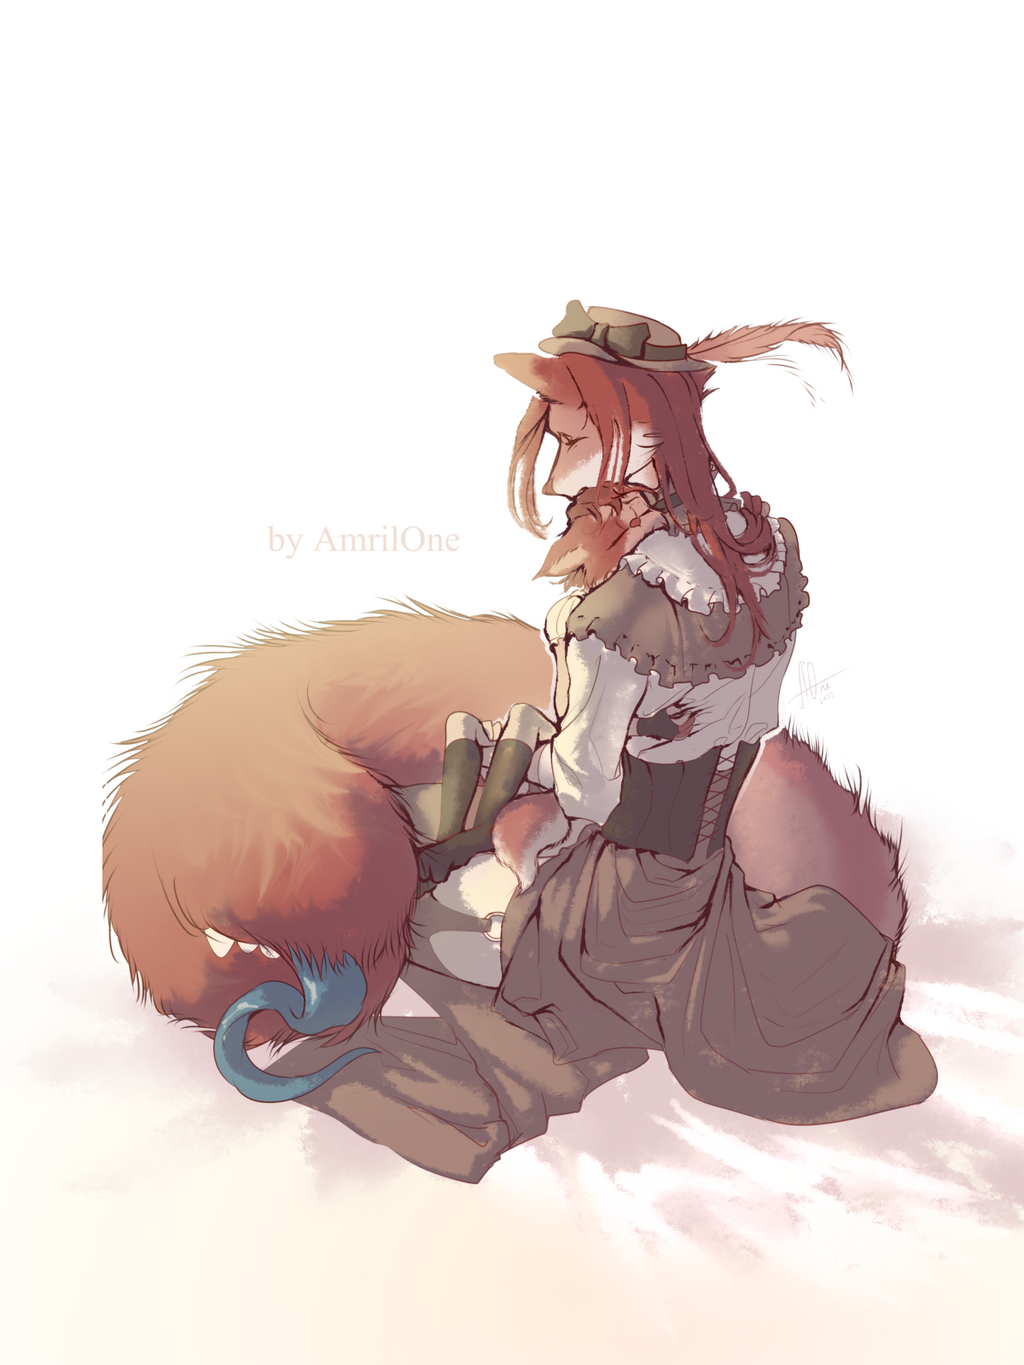 Hush Little Baby Don't You Cry - By AmrilOne